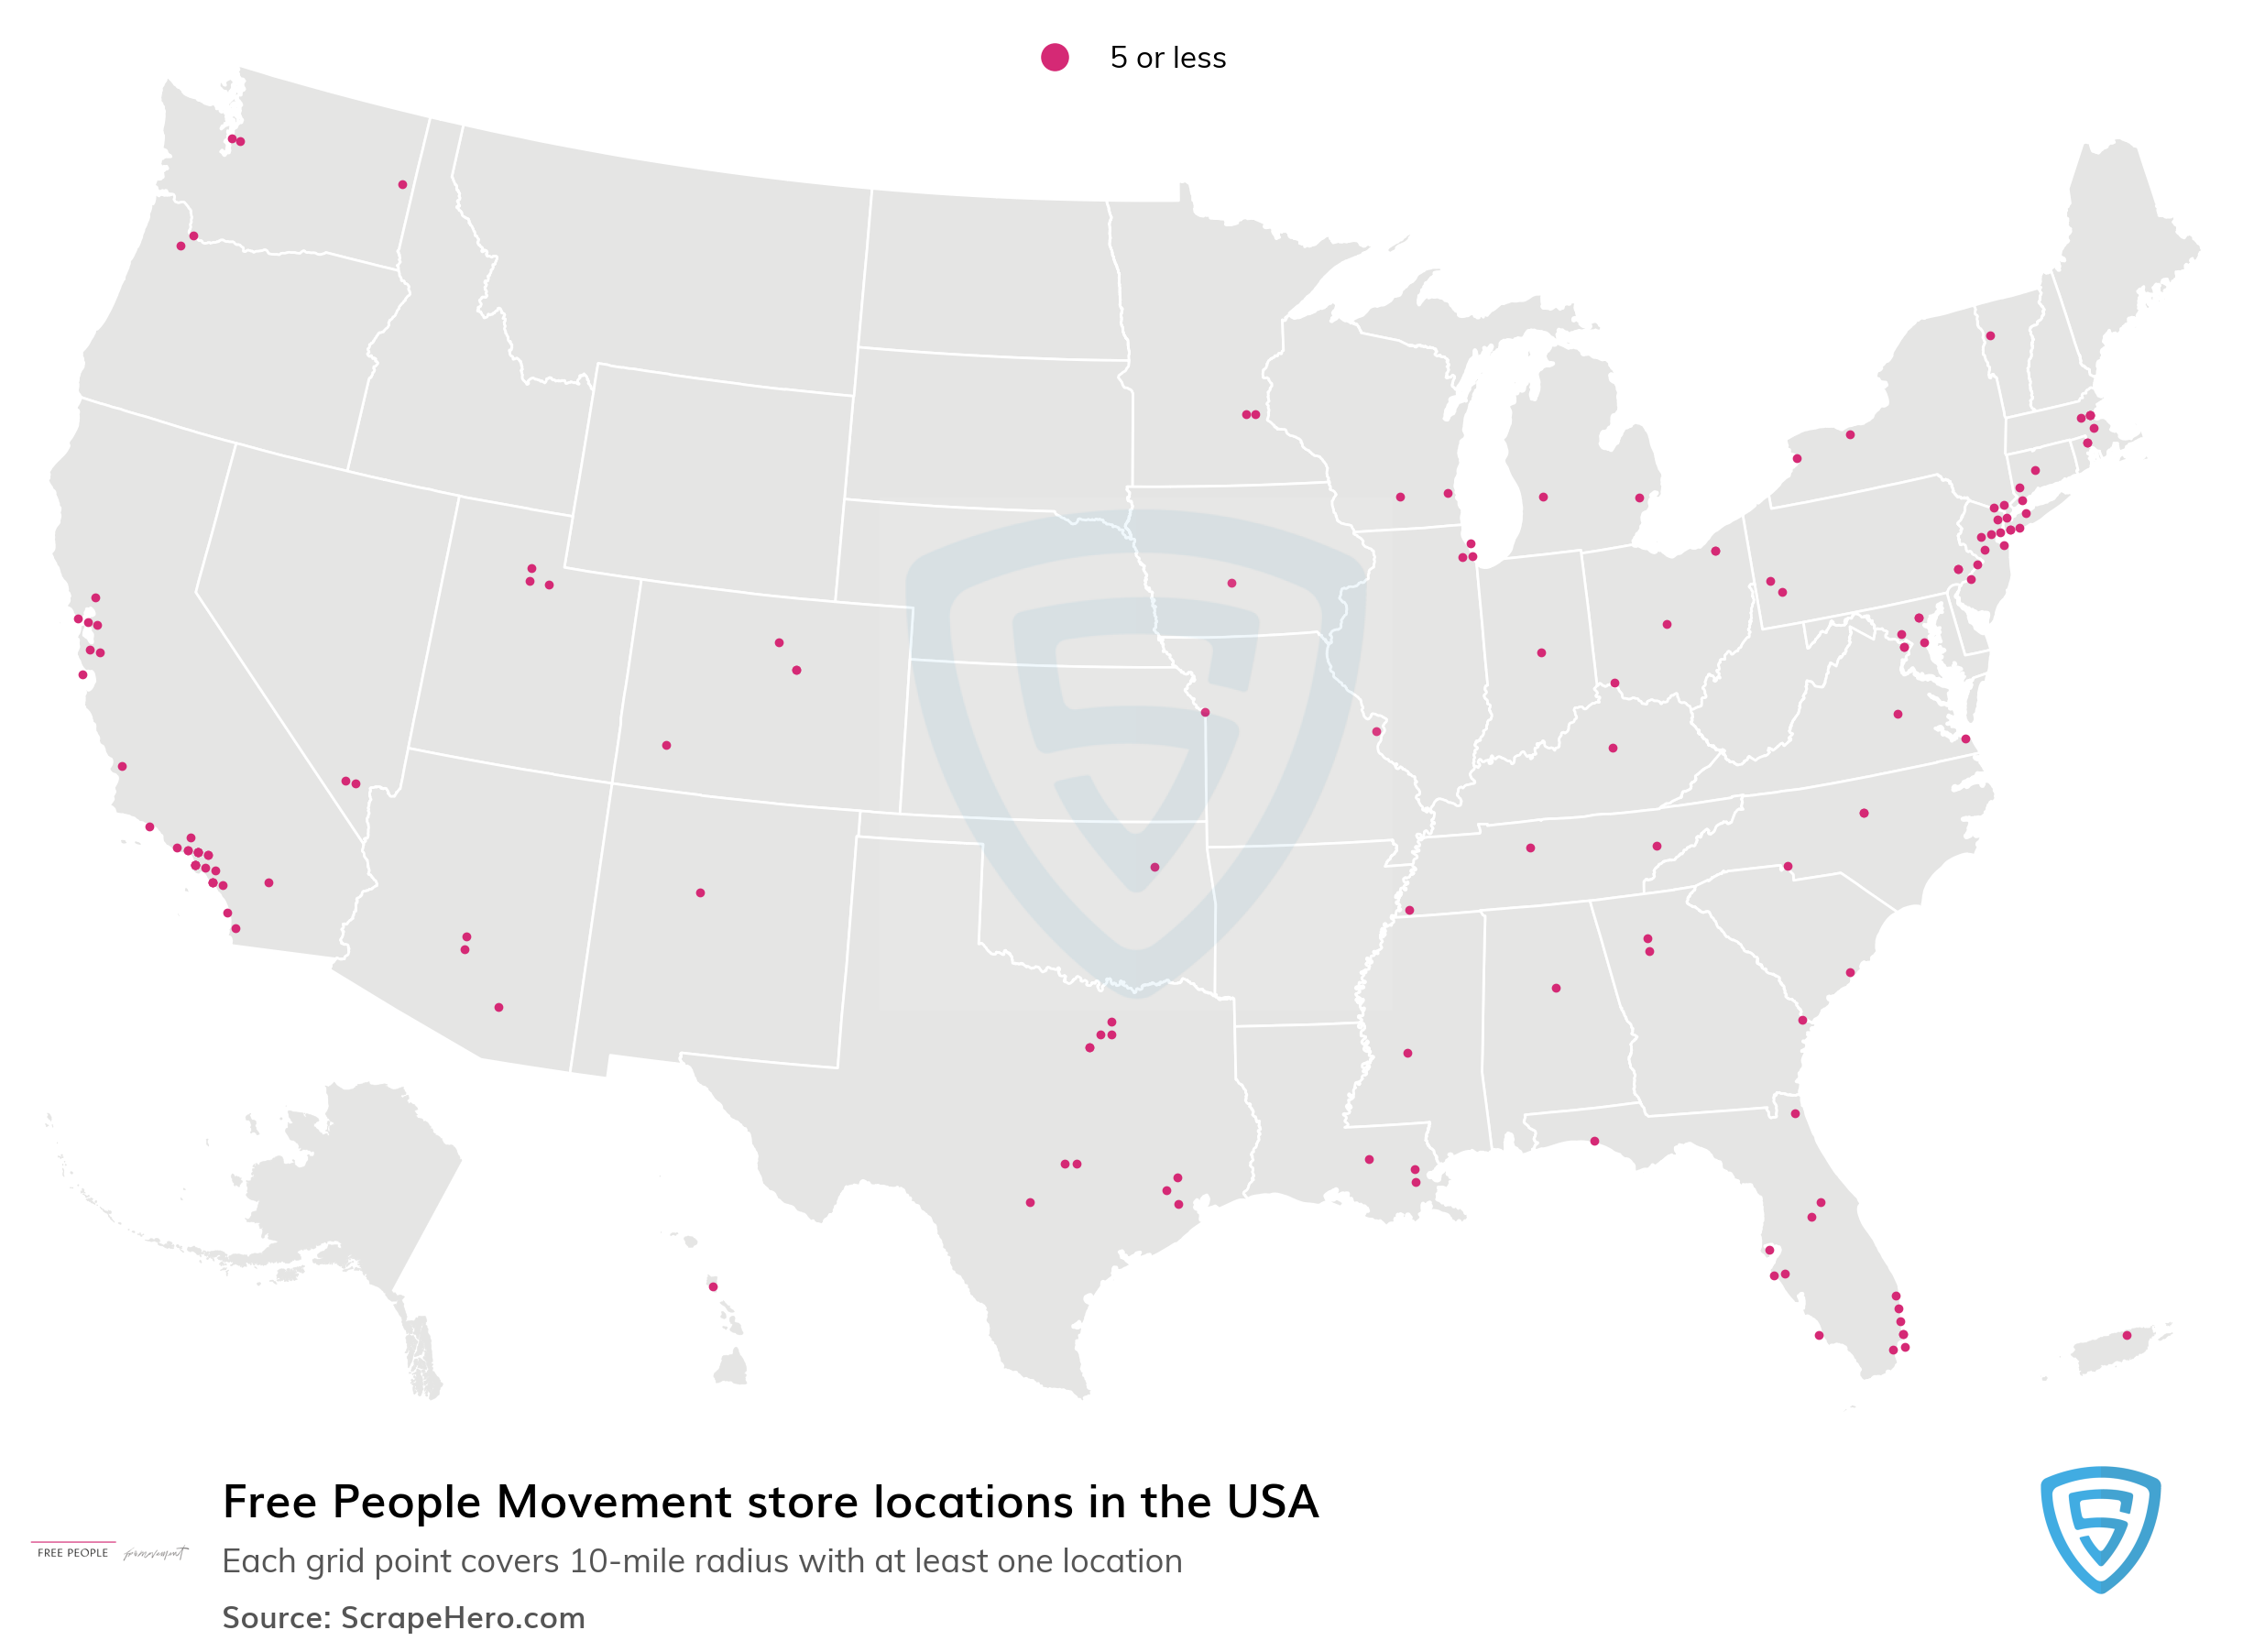 Number of Free People Movement locations in the USA in 2023